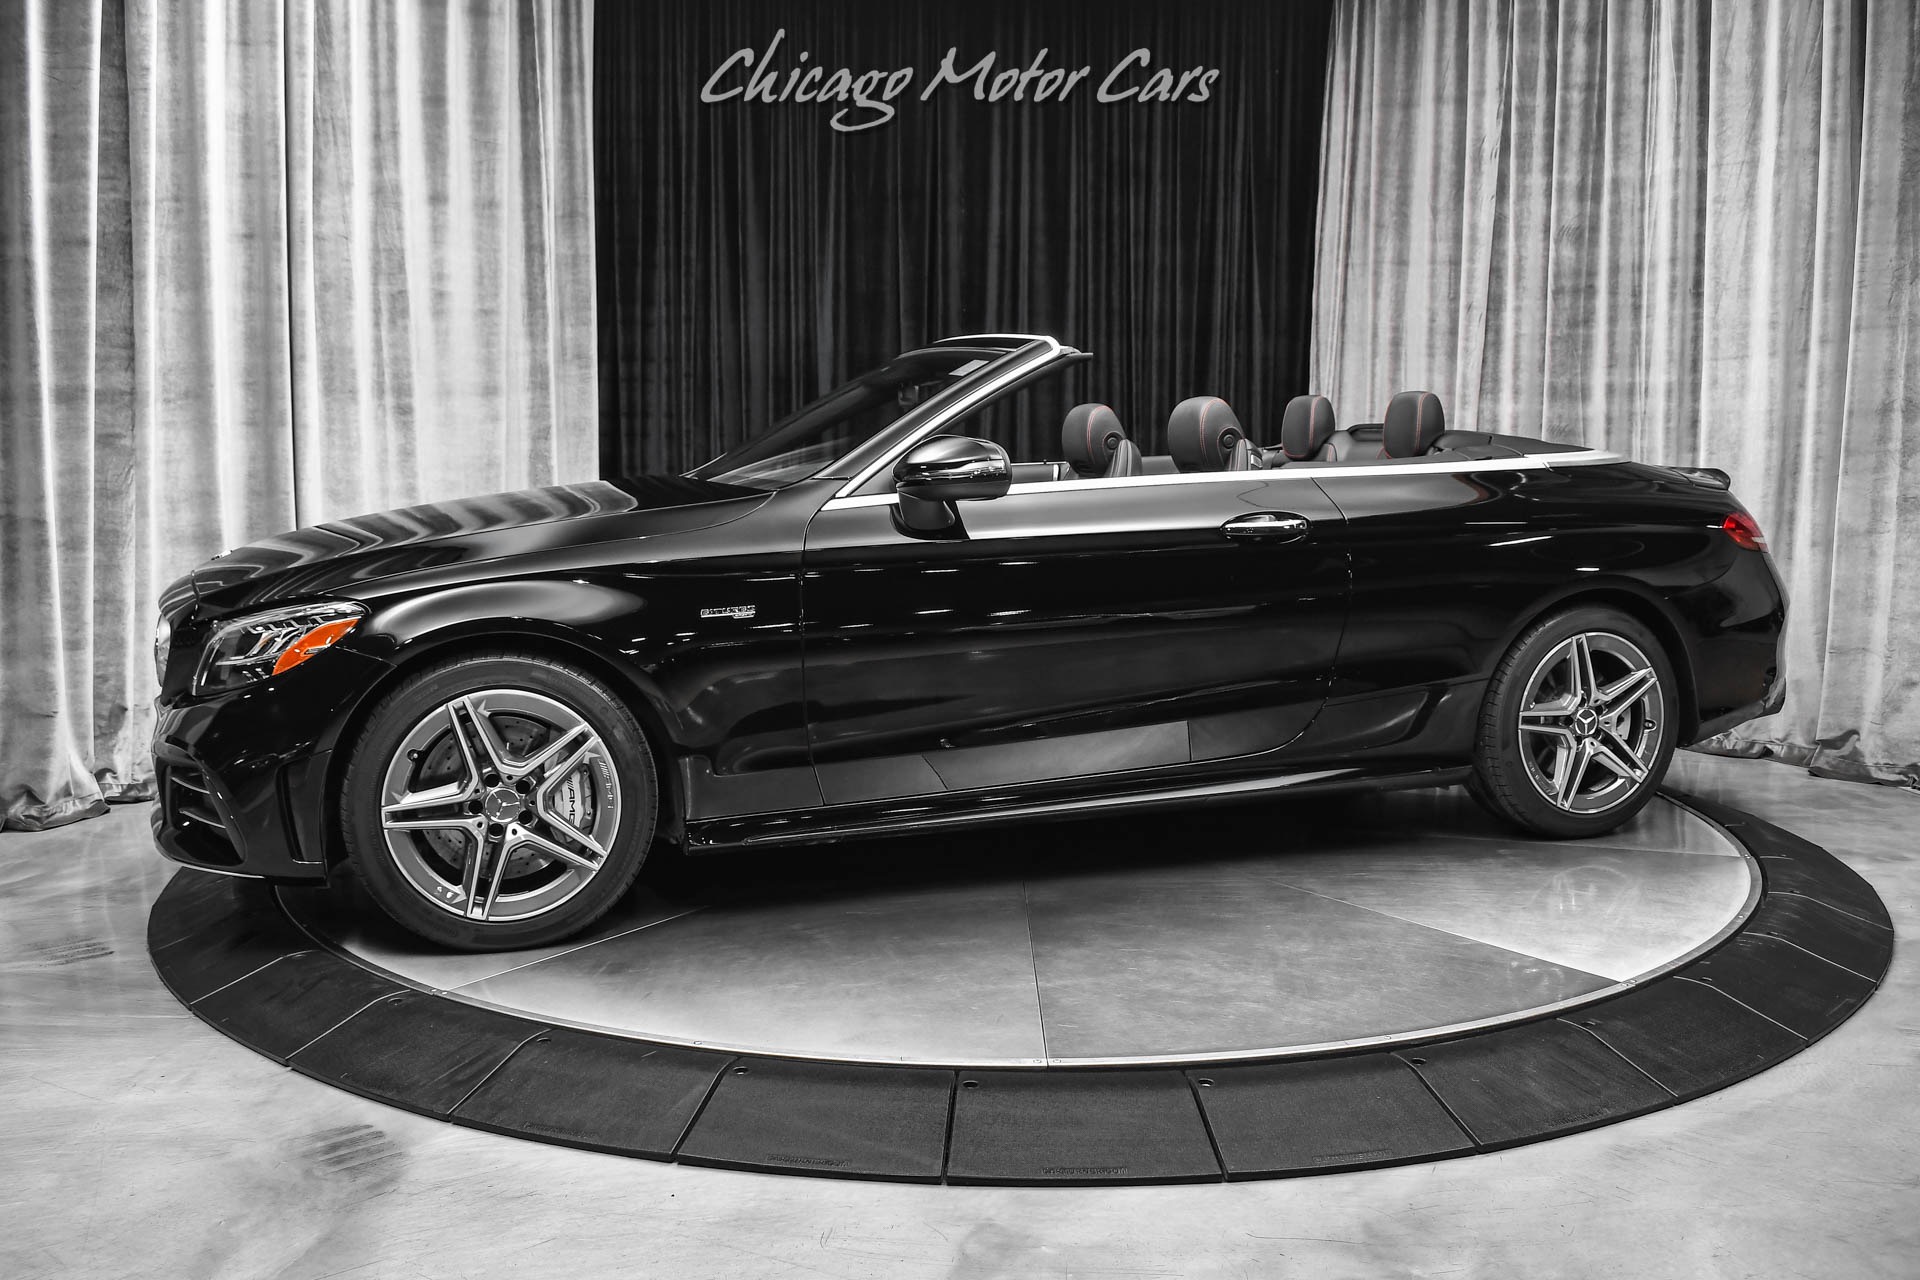 Used-2019-Mercedes-Benz-C43-AMG-Convertible-Only-15k-Miles-Excellent-Condition-Throughout-18-AMG-Wheels